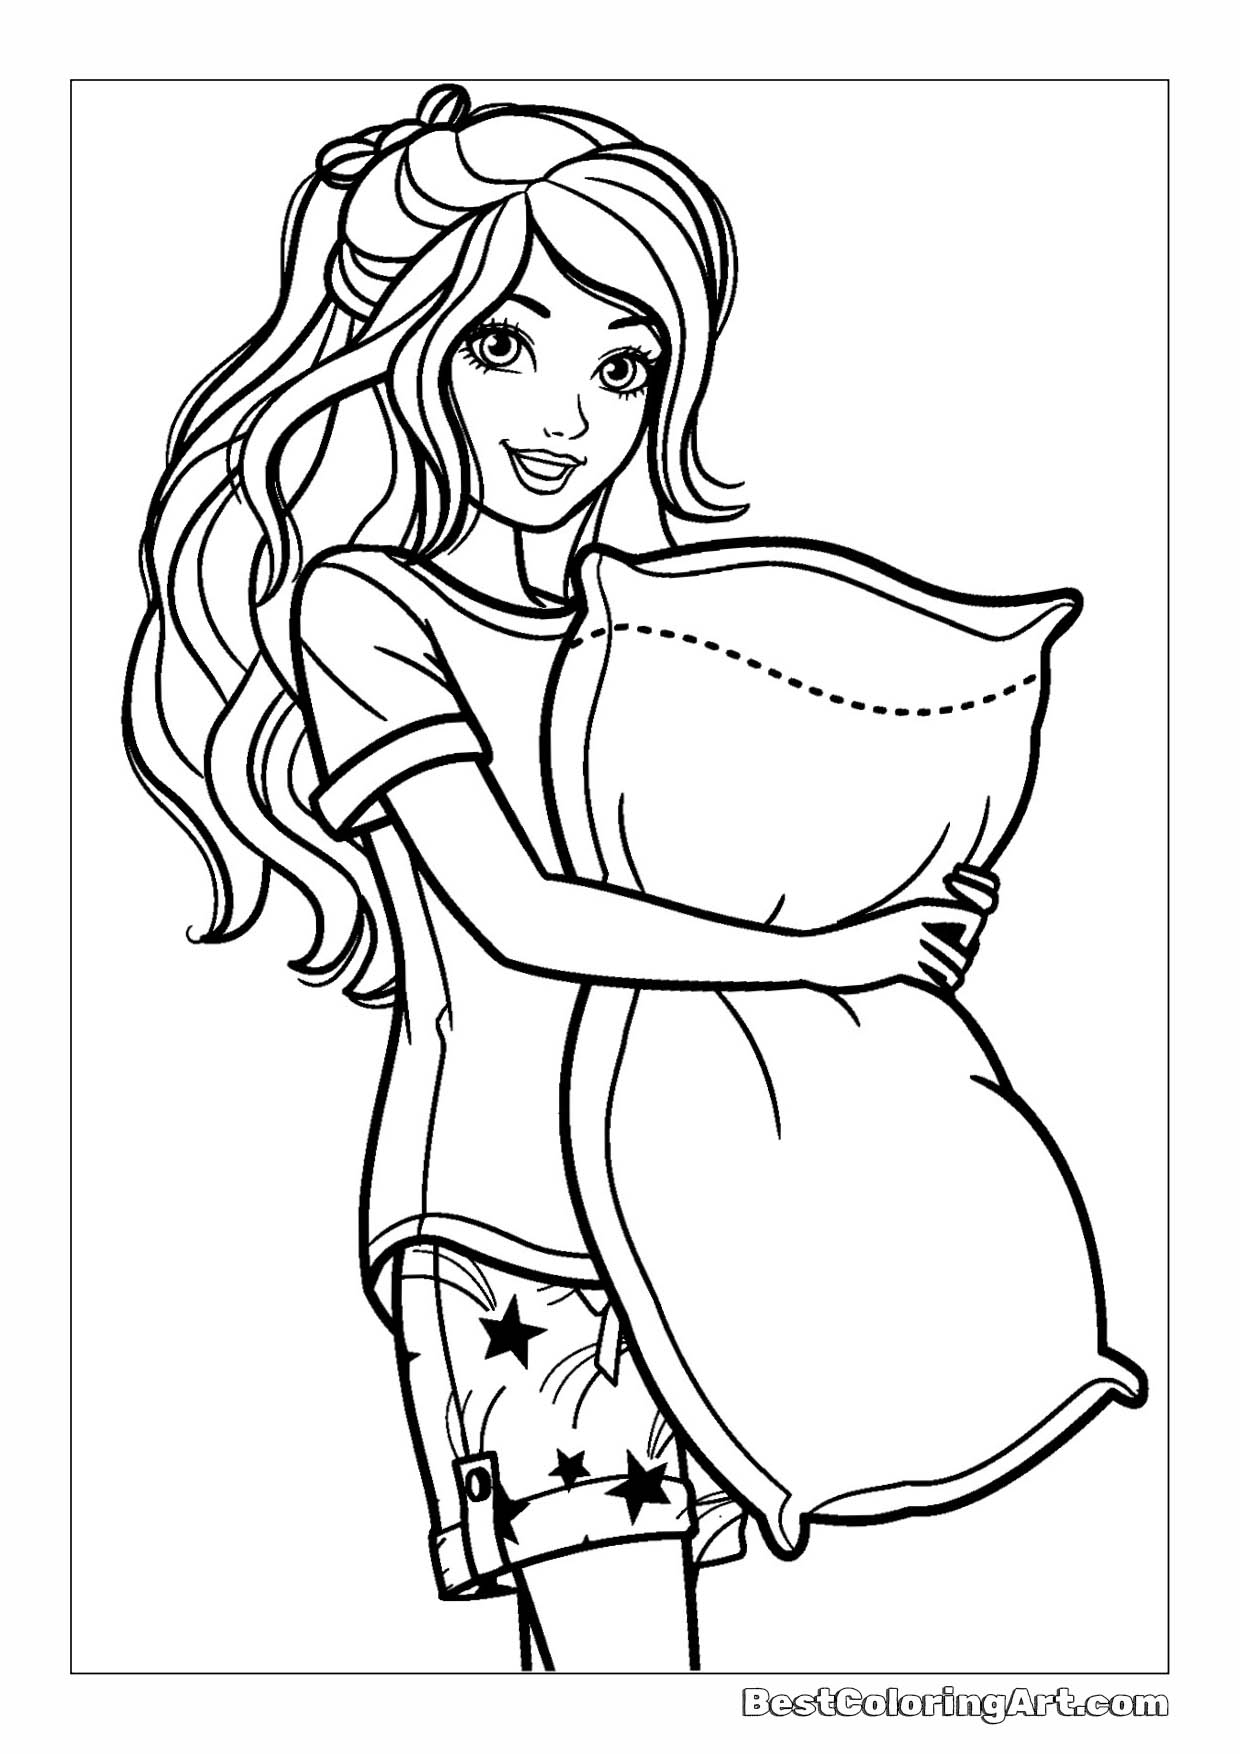 Barbie with a pillow - Barbie coloring page - Printable & Free PDFs